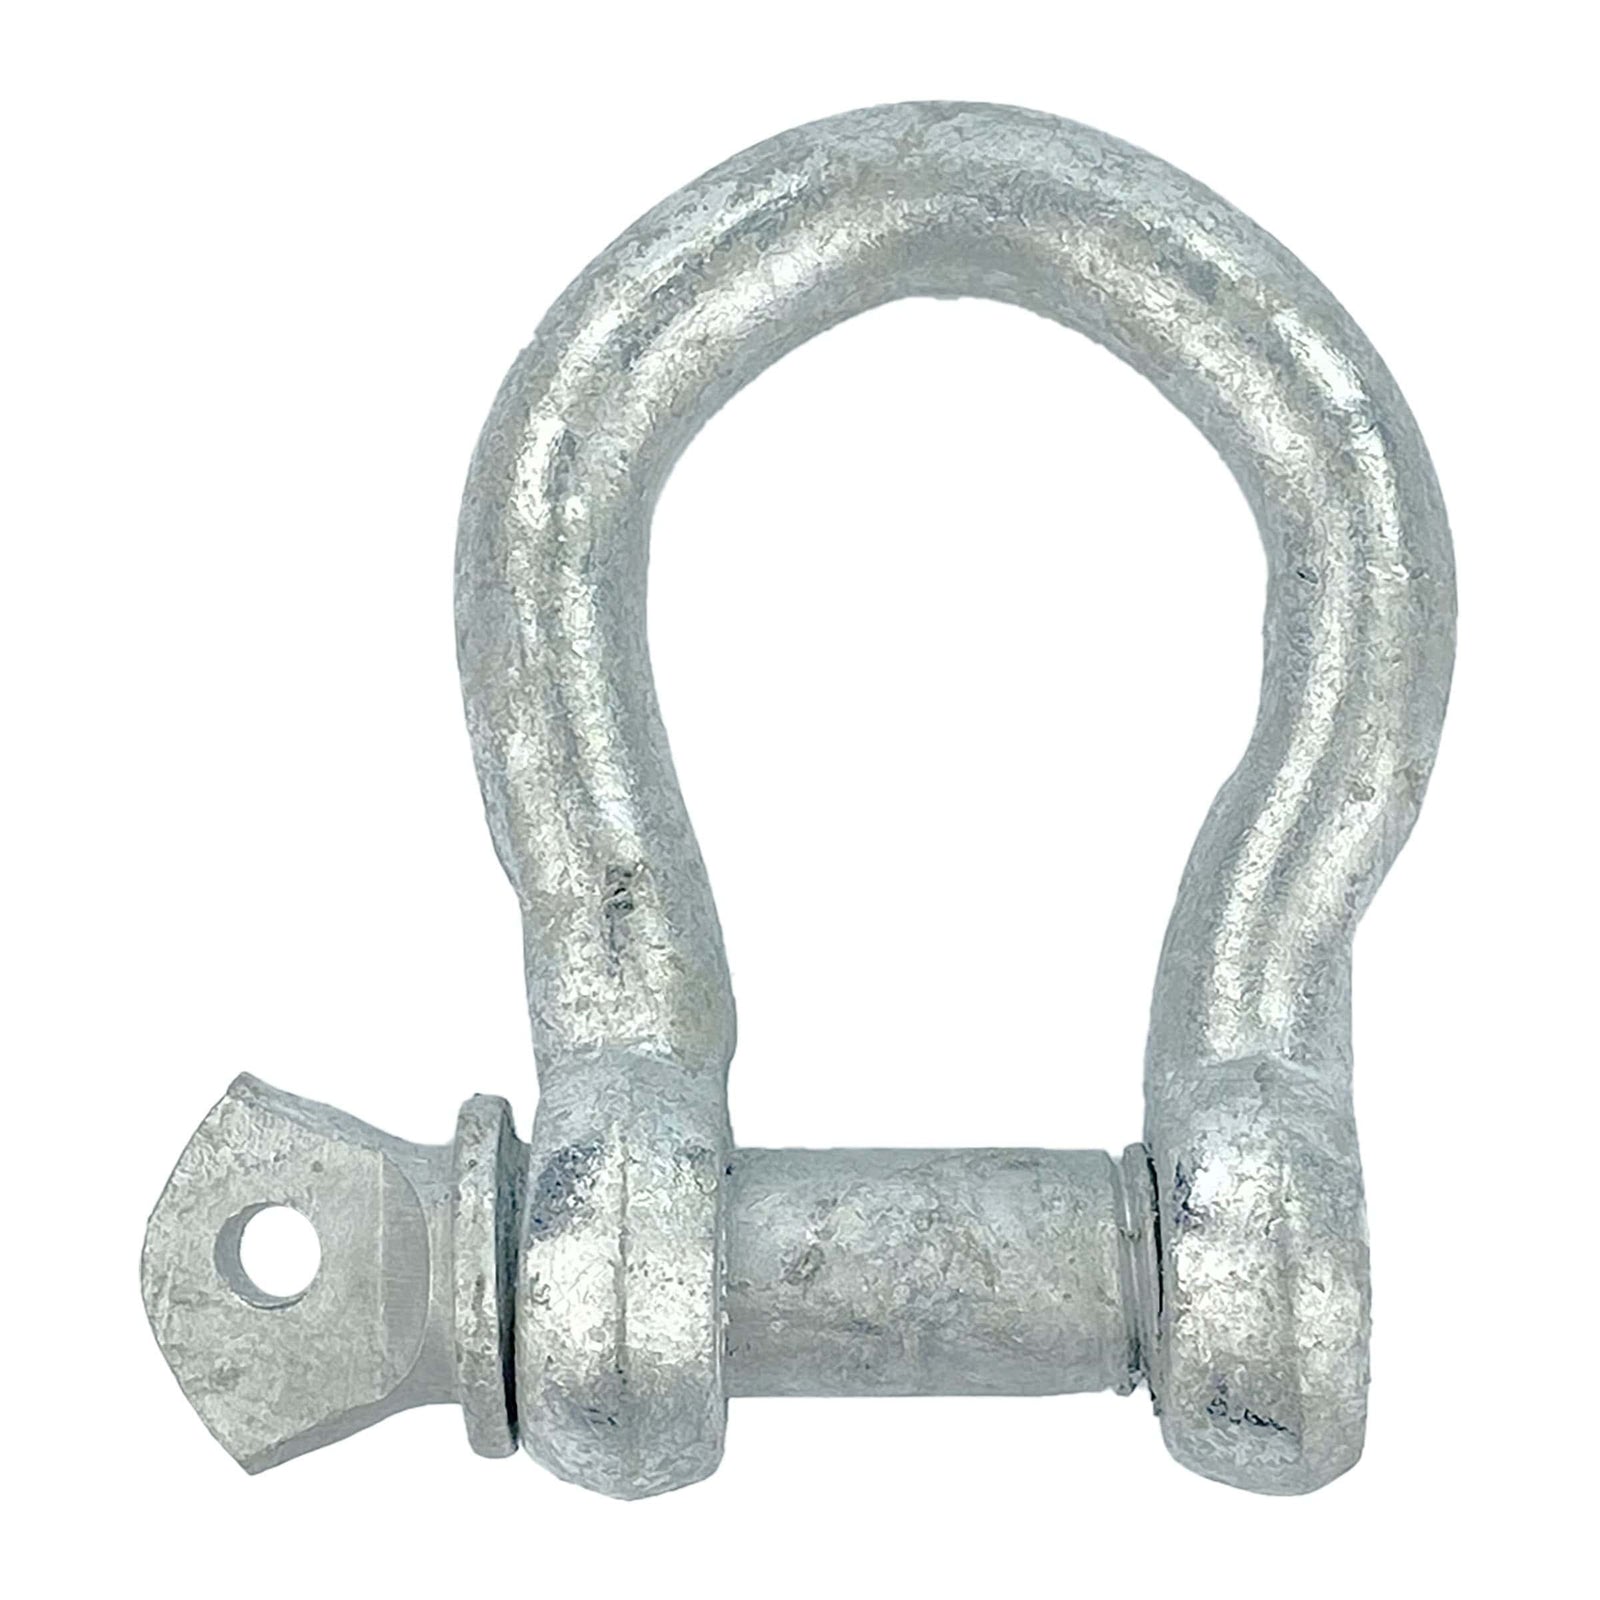 Galvanized Anchor Shackle For Boat, 3/8"